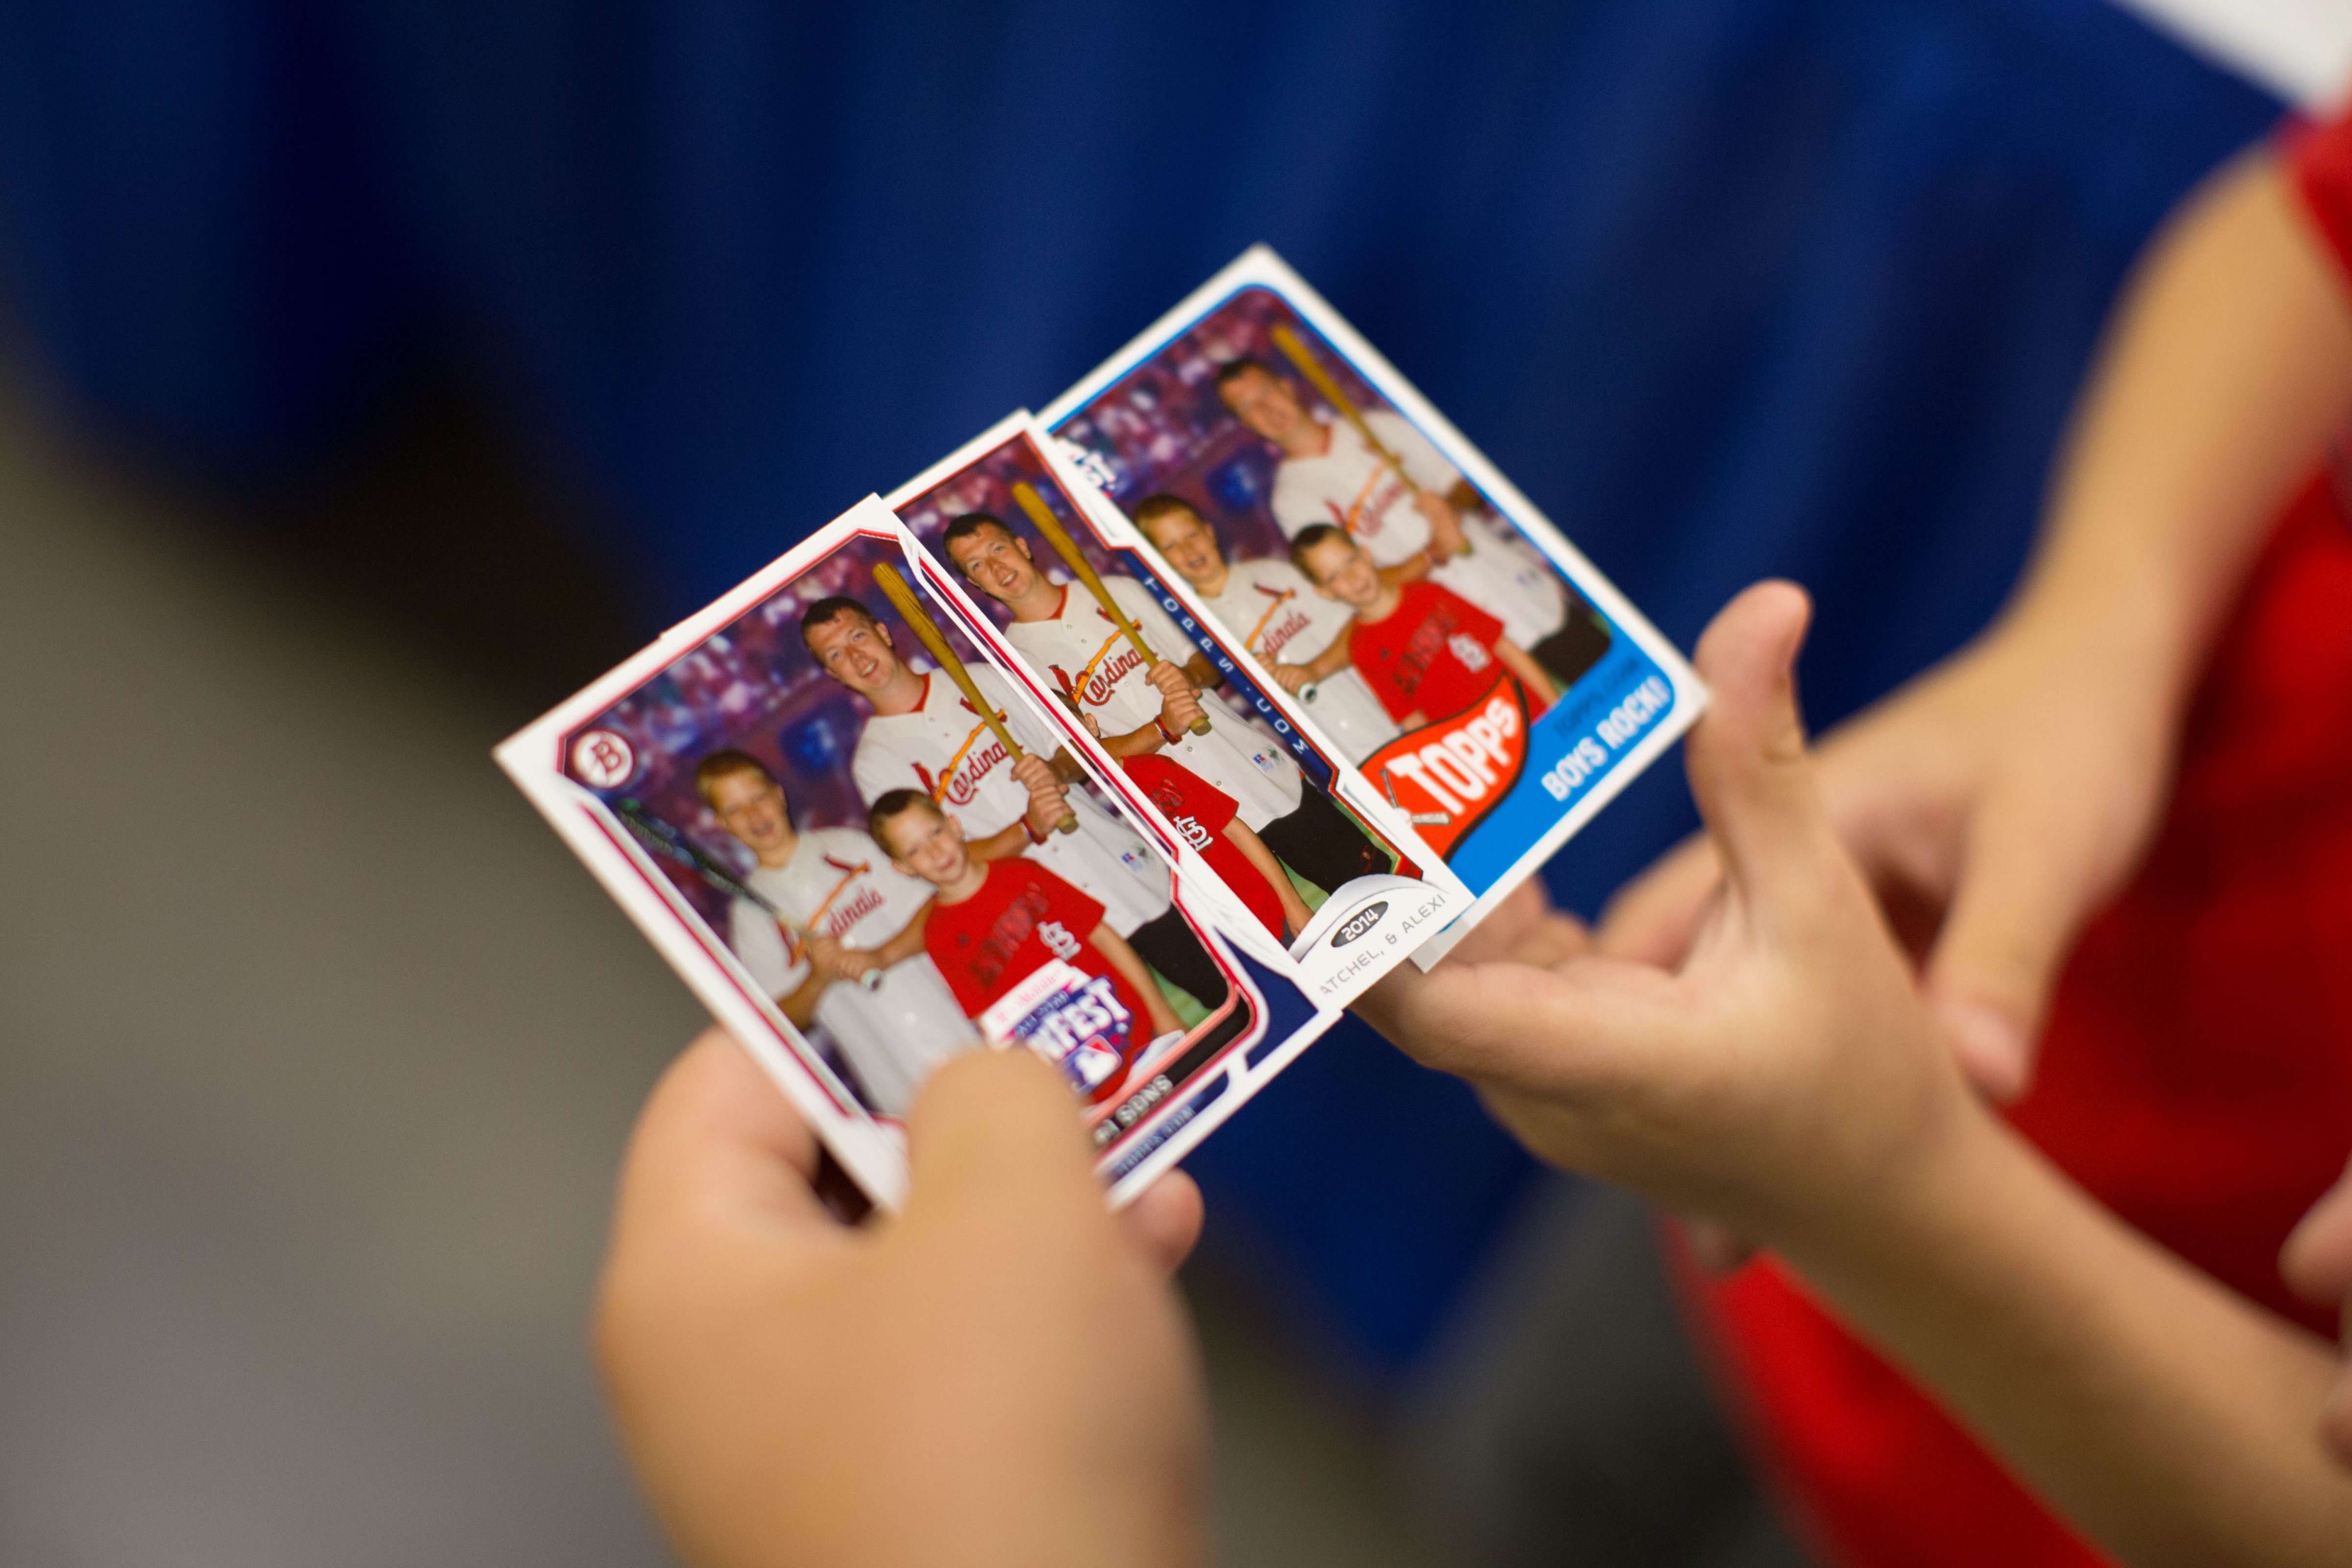 Fans hold Topps Baseball  same day baseball cards during the T-Mobile Major League Baseball All-Star FanFest at the Minneapolis Convention Center on Friday, July 11, 2014 in Minneapolis, Minnesota. (Taylor Baucom—MLB Photos via Getty Images)